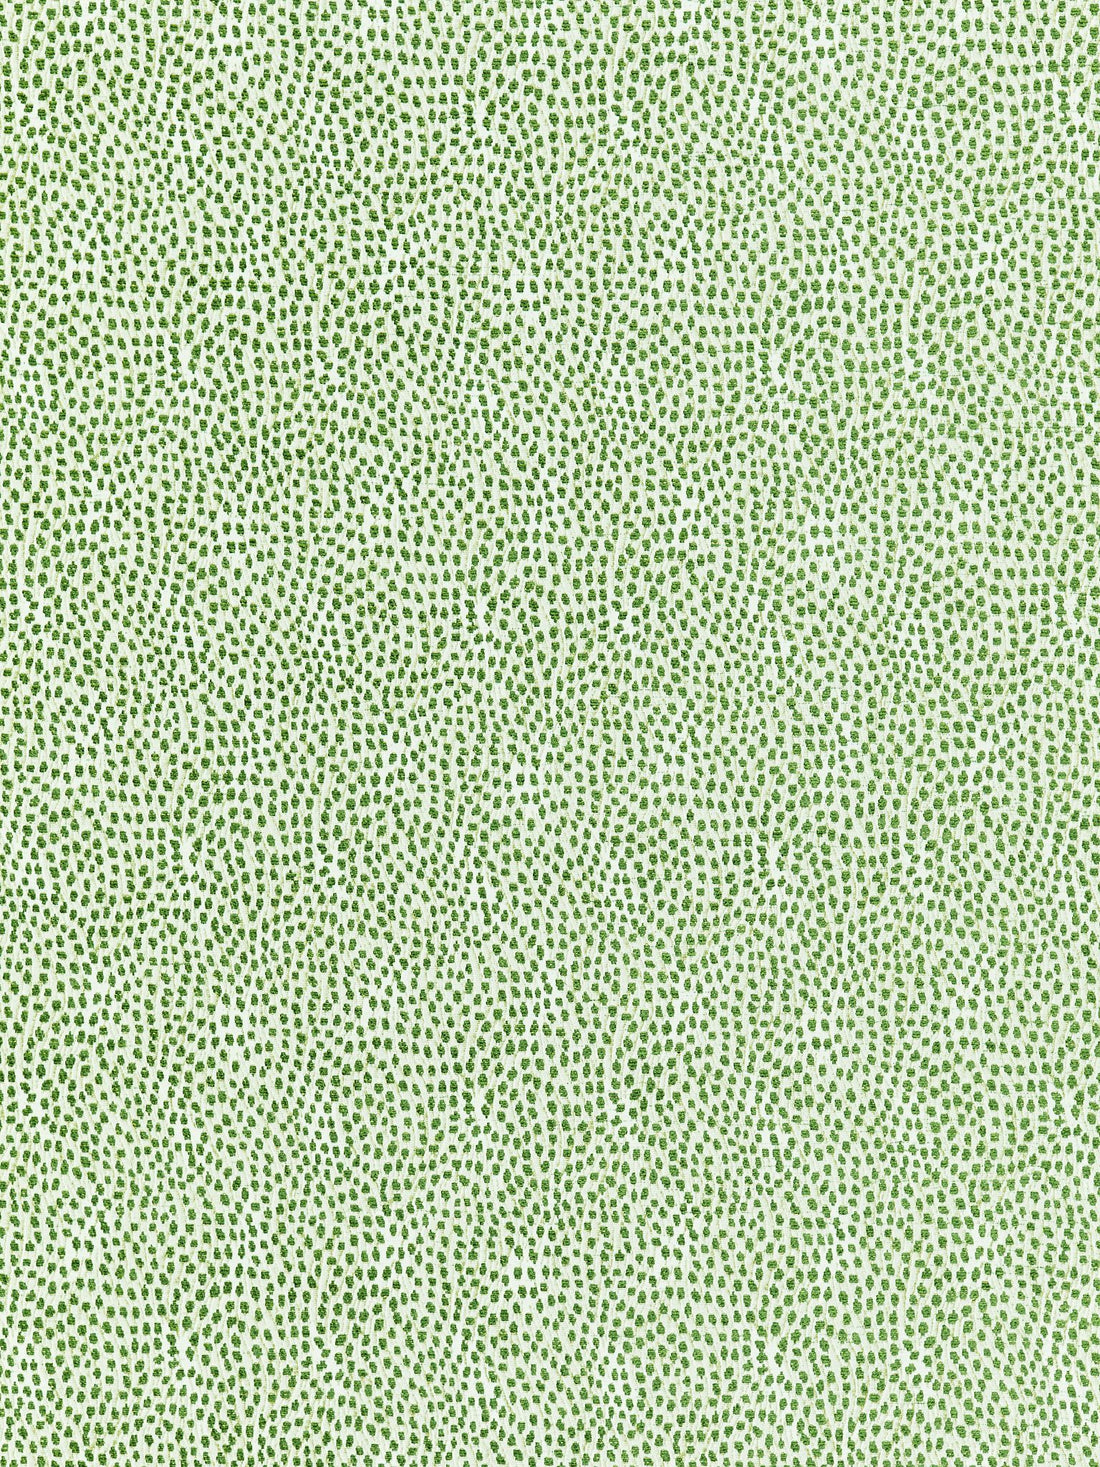 Flurry fabric in leaf color - pattern number BI 00031234 - by Scalamandre in the Old World Weavers collection